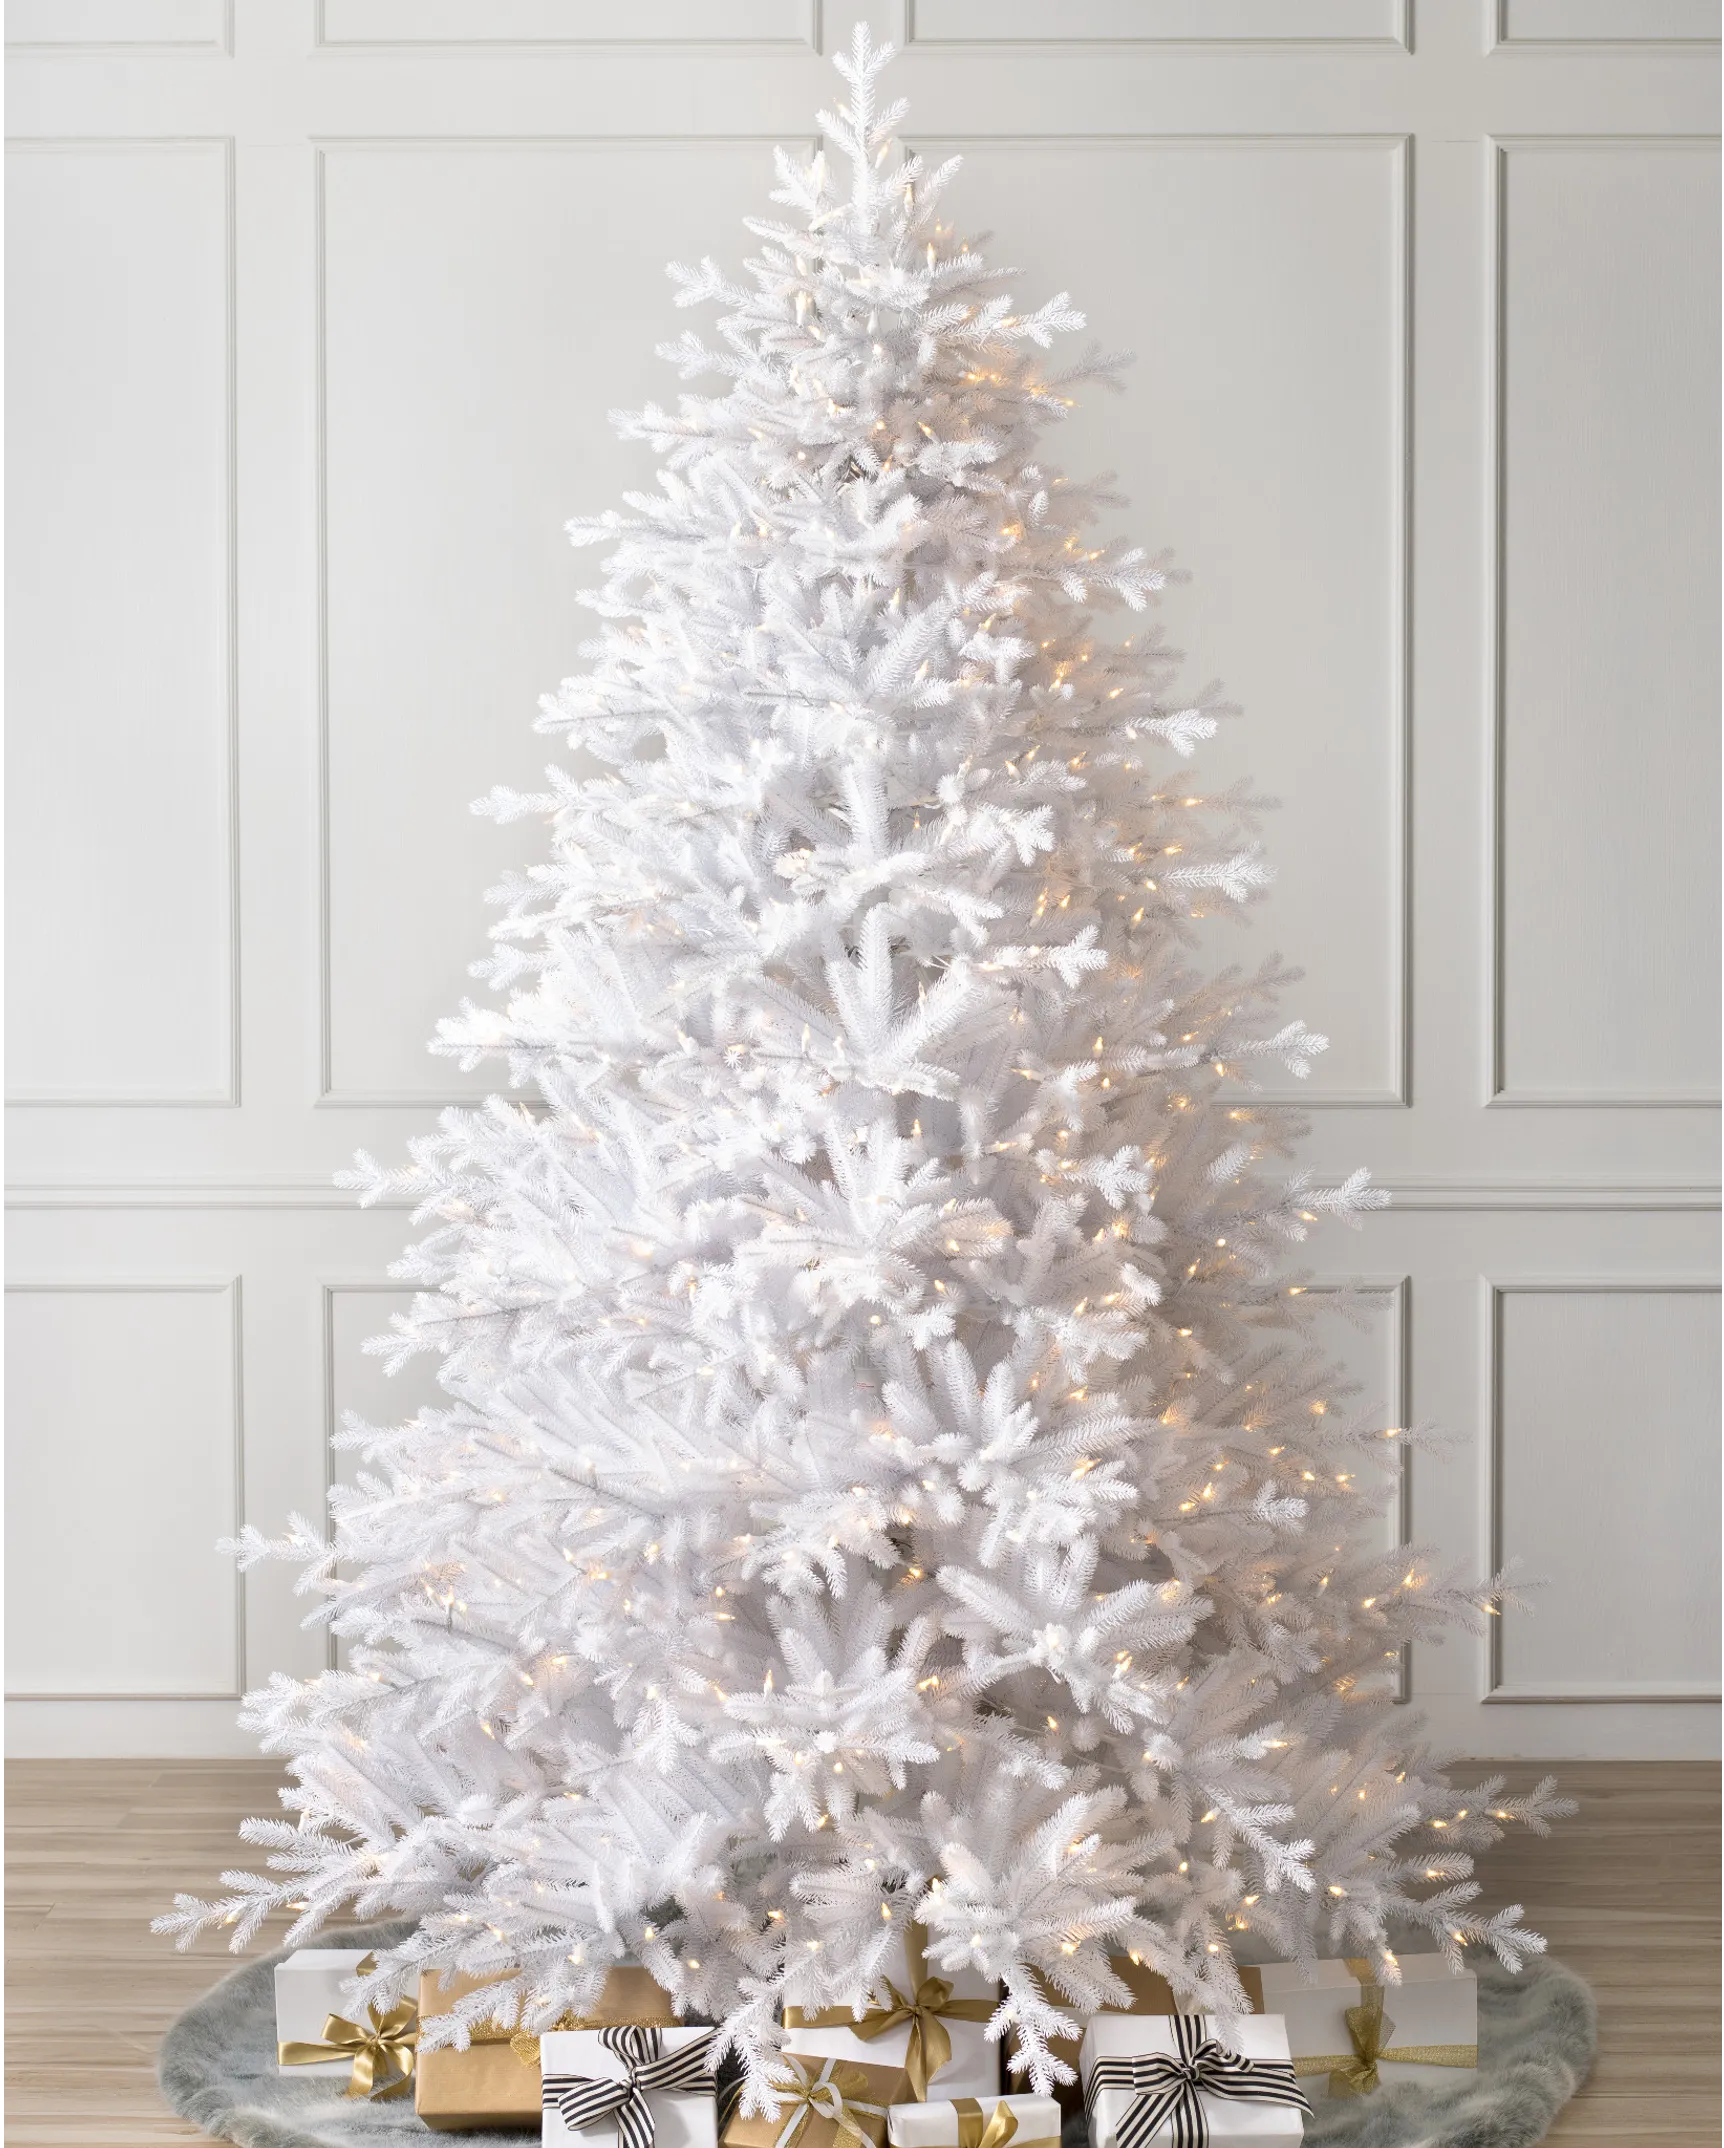 How To Make A White Christmas Tree The Centerpiece Of Your Holiday Decor